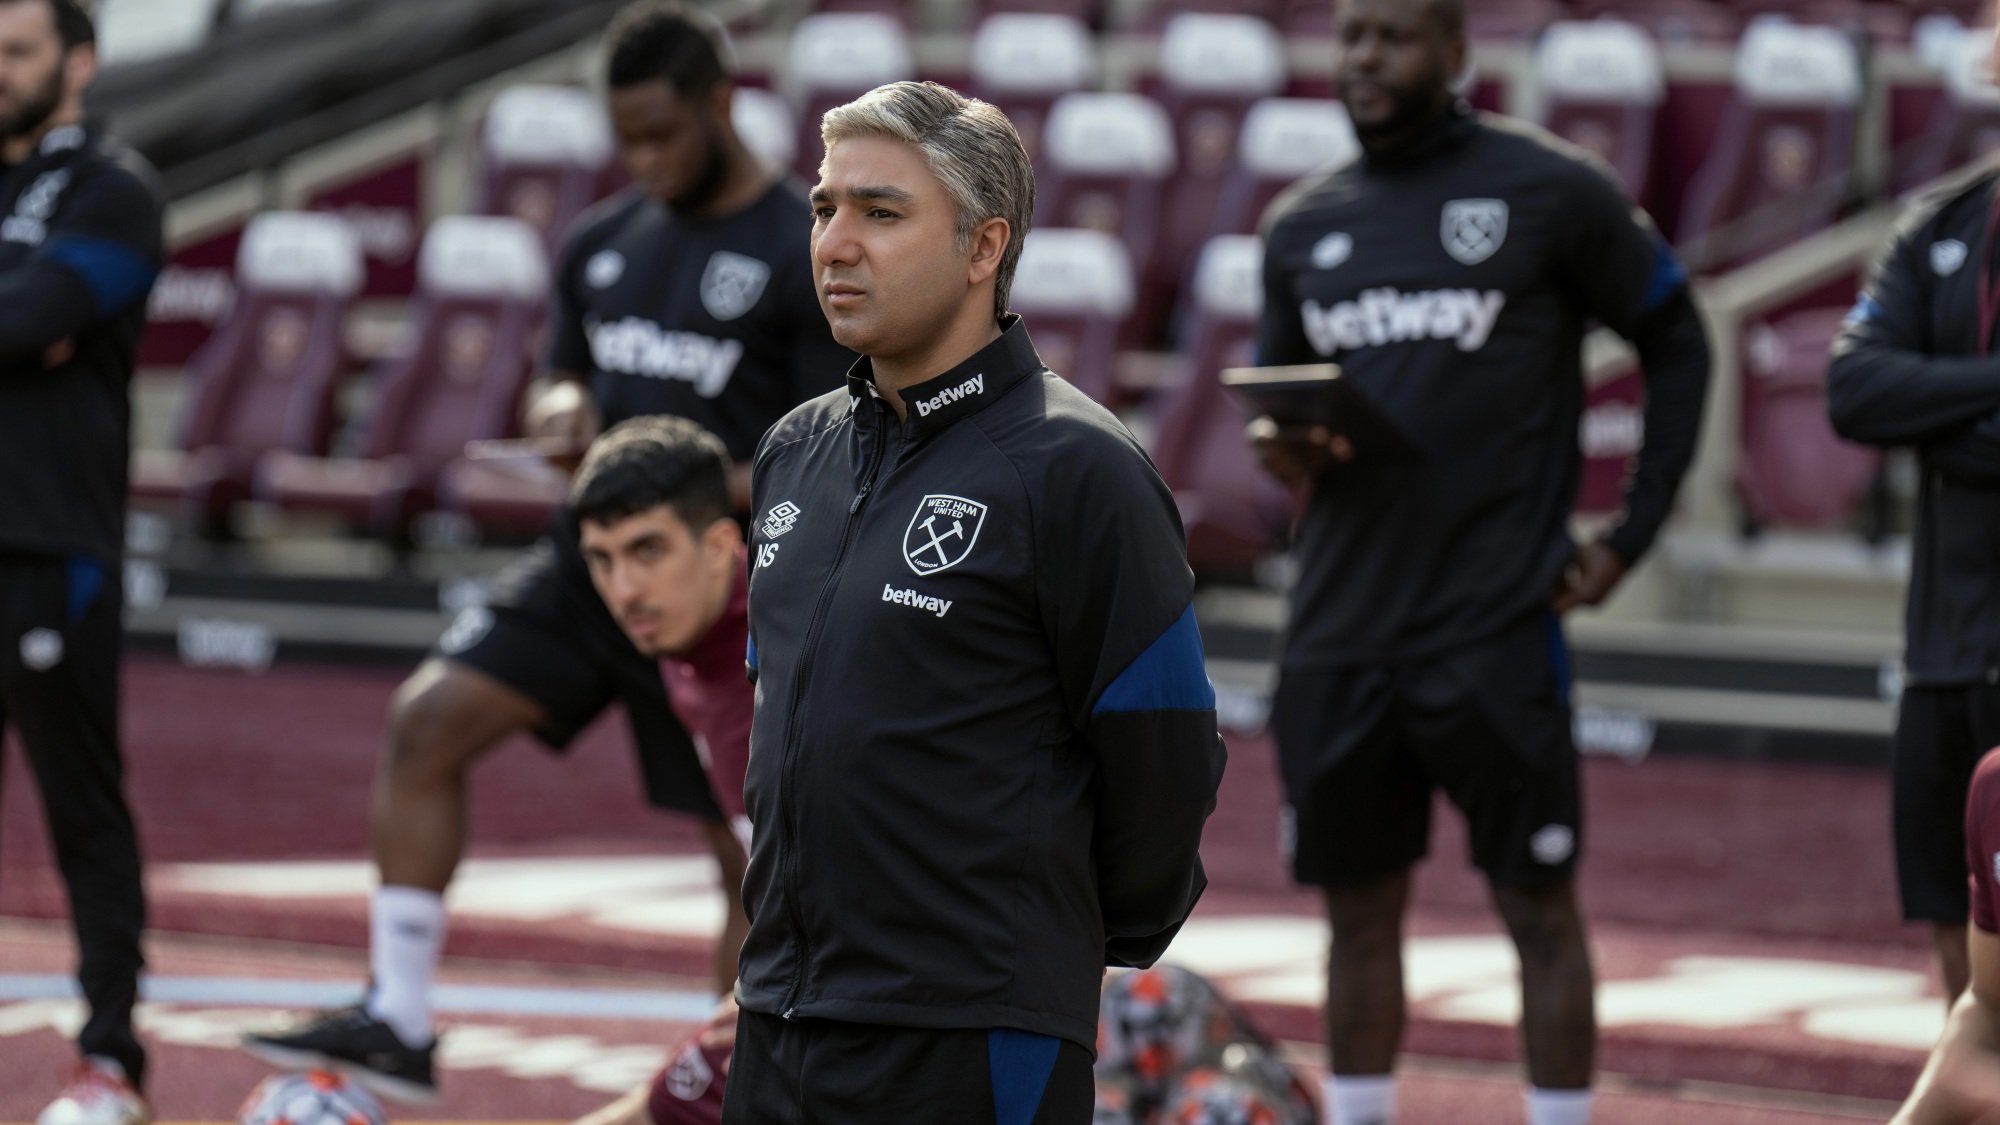 Nate from "Ted Lasso" coaches West Ham practice from the sidelines of their stadium.